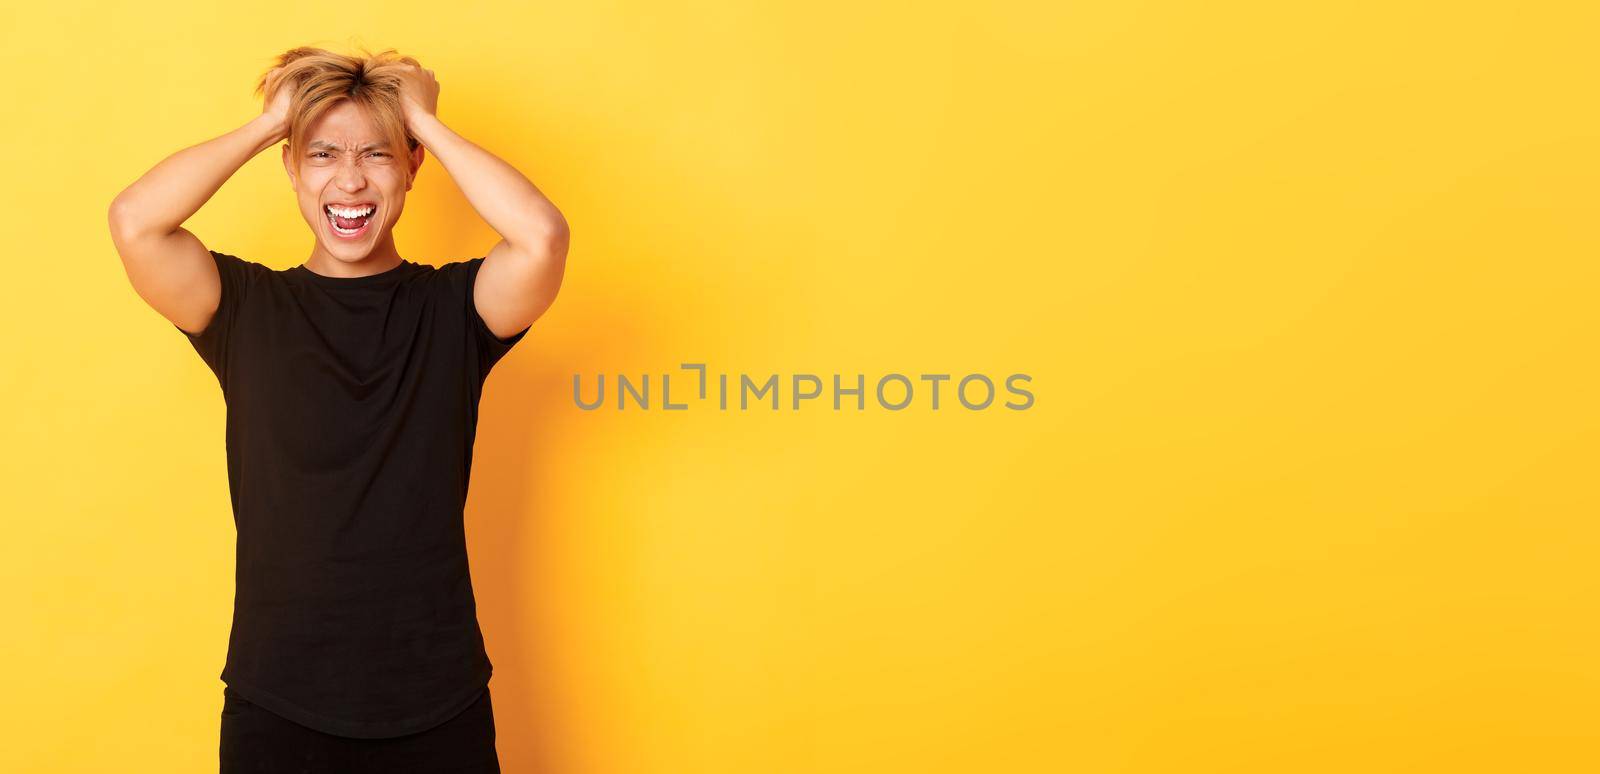 Portrait of pissed-off angry asian man tossing haircut and yelling furious, standing over yellow background.